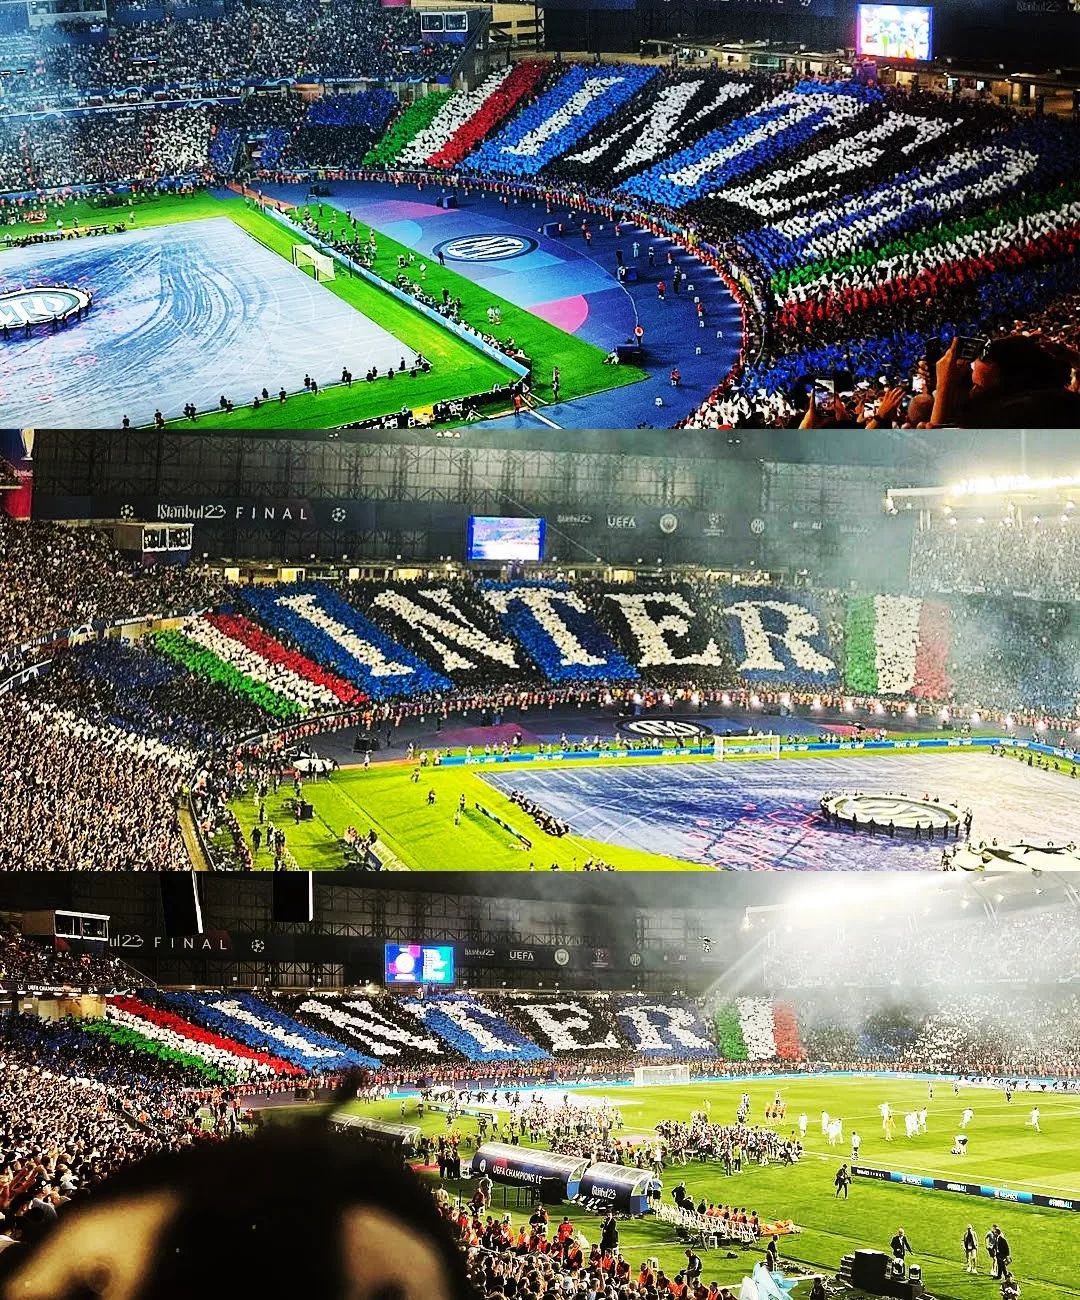 𝐂𝐚𝐬𝐮𝐚𝐥 𝐔𝐥𝐭𝐫𝐚 𝐎𝐟𝐟𝐢𝐜𝐢𝐚𝐥 on X: Curva Nord Inter tifo at CL  final against Man City in Istanbul tonight!  / X